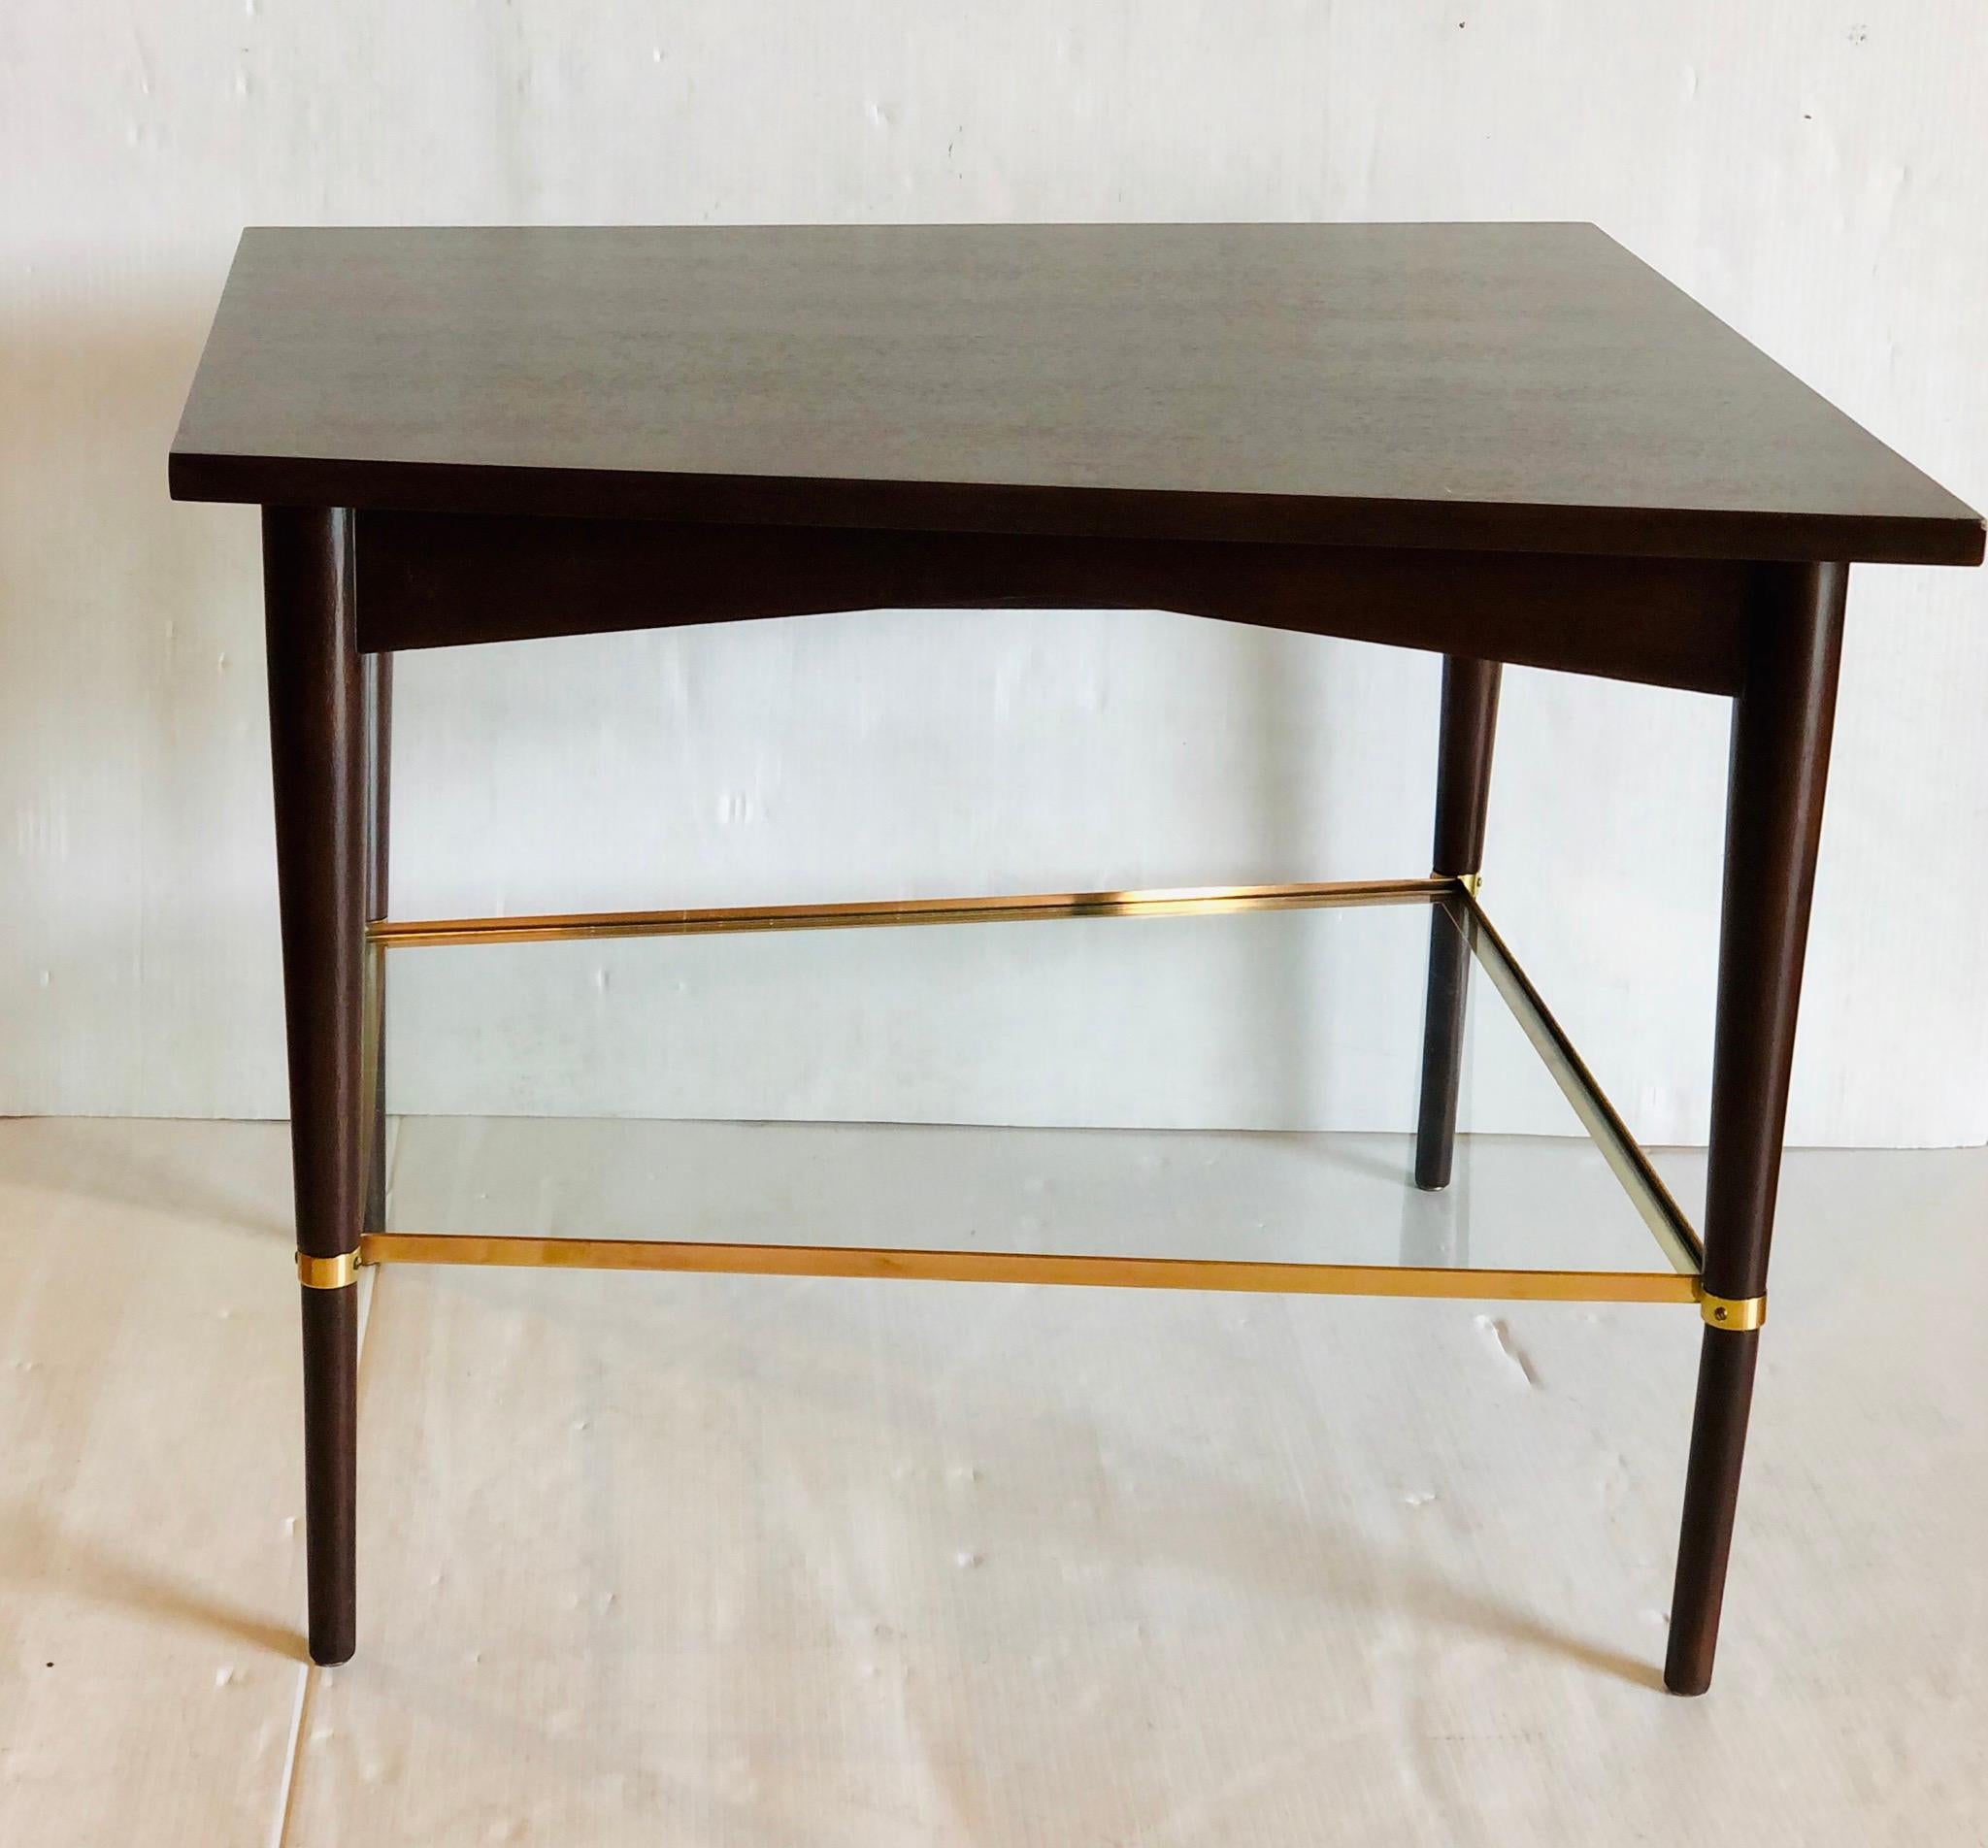 American Midcentury Paul McCobb Wedge Table Mod.7014, Connoisseur Collection